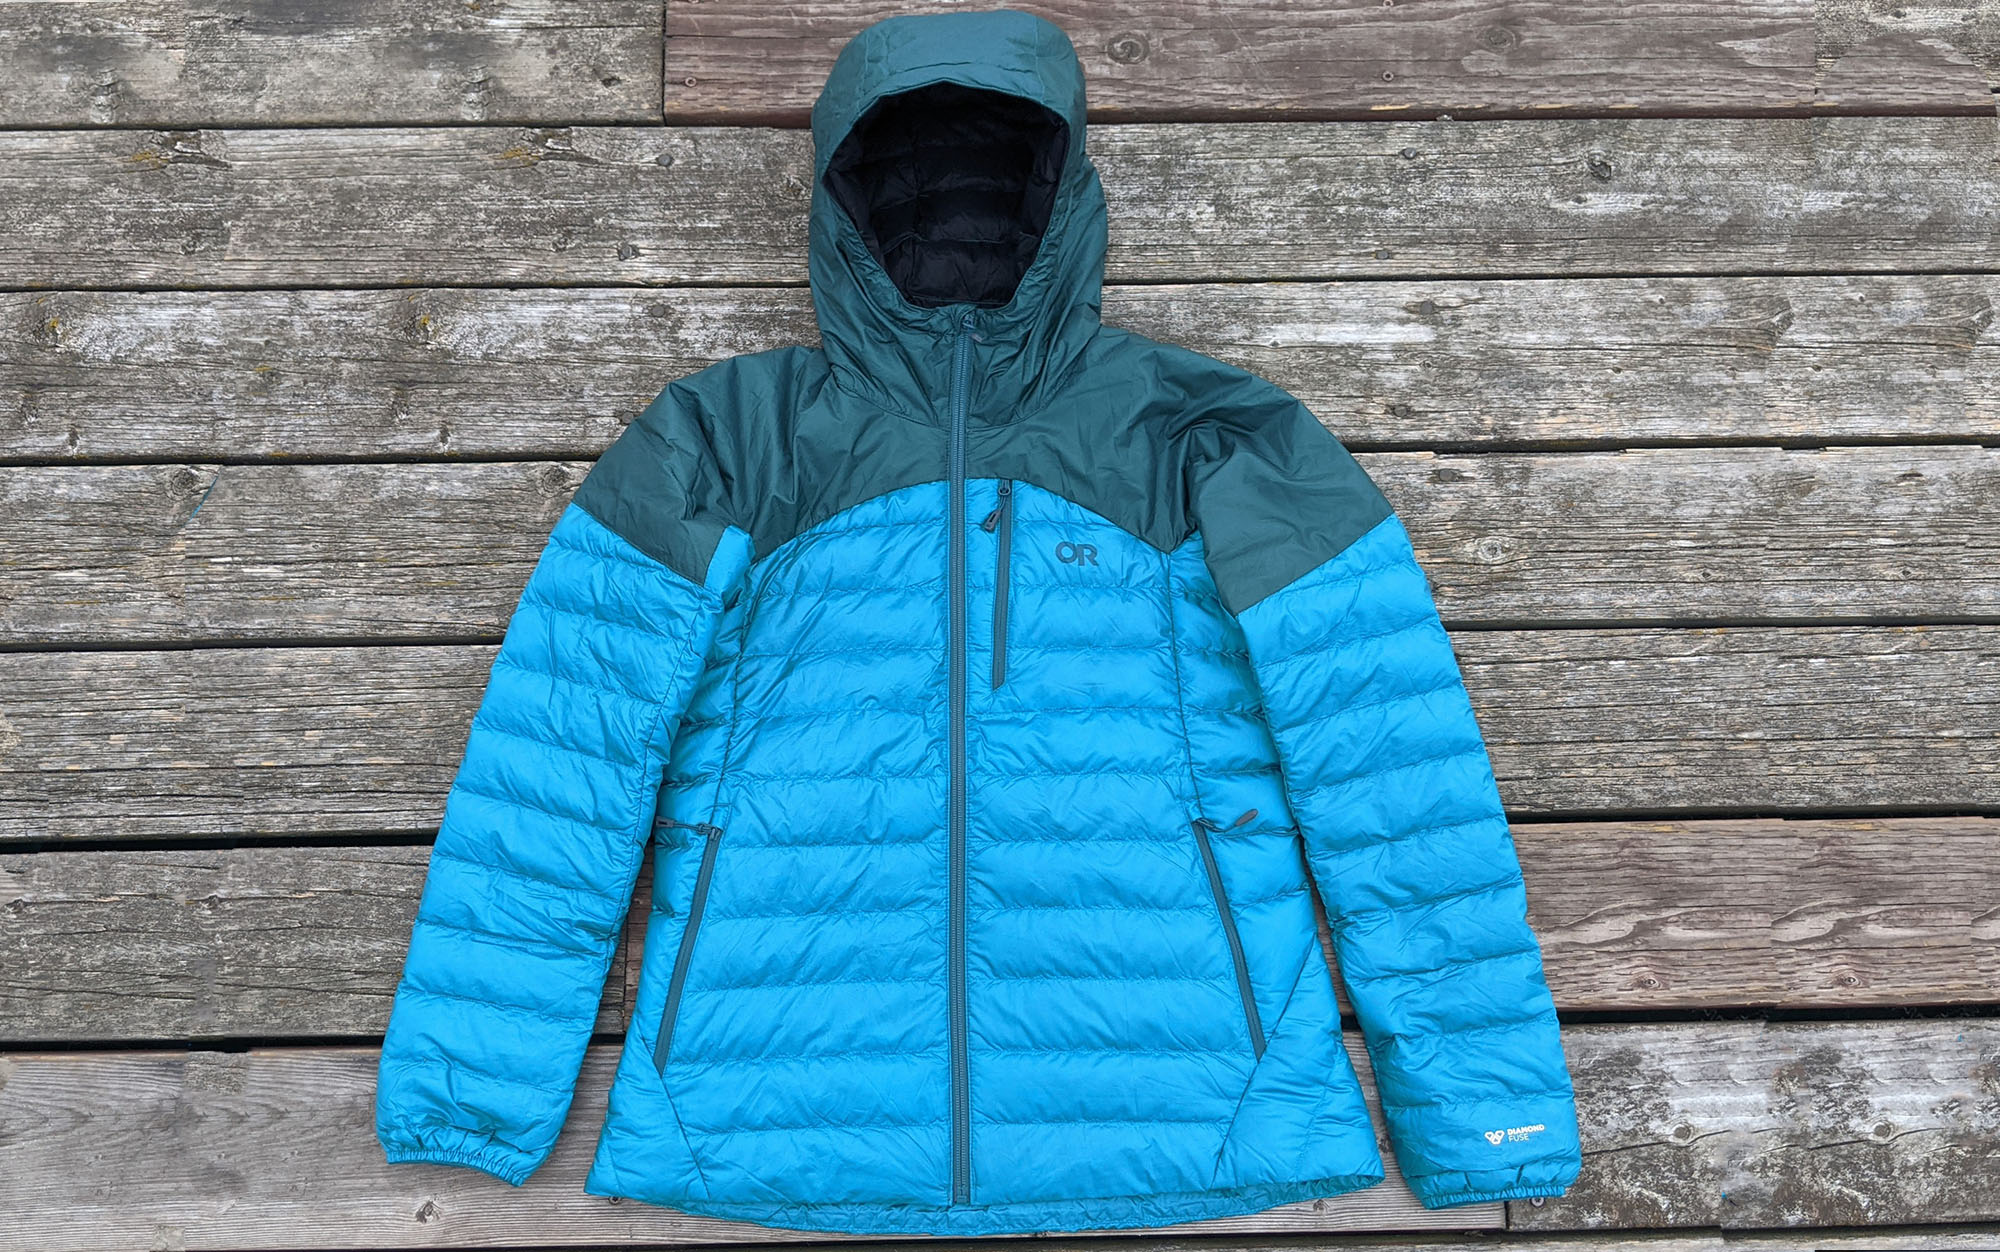 The Best Packable Down Jackets of 2023